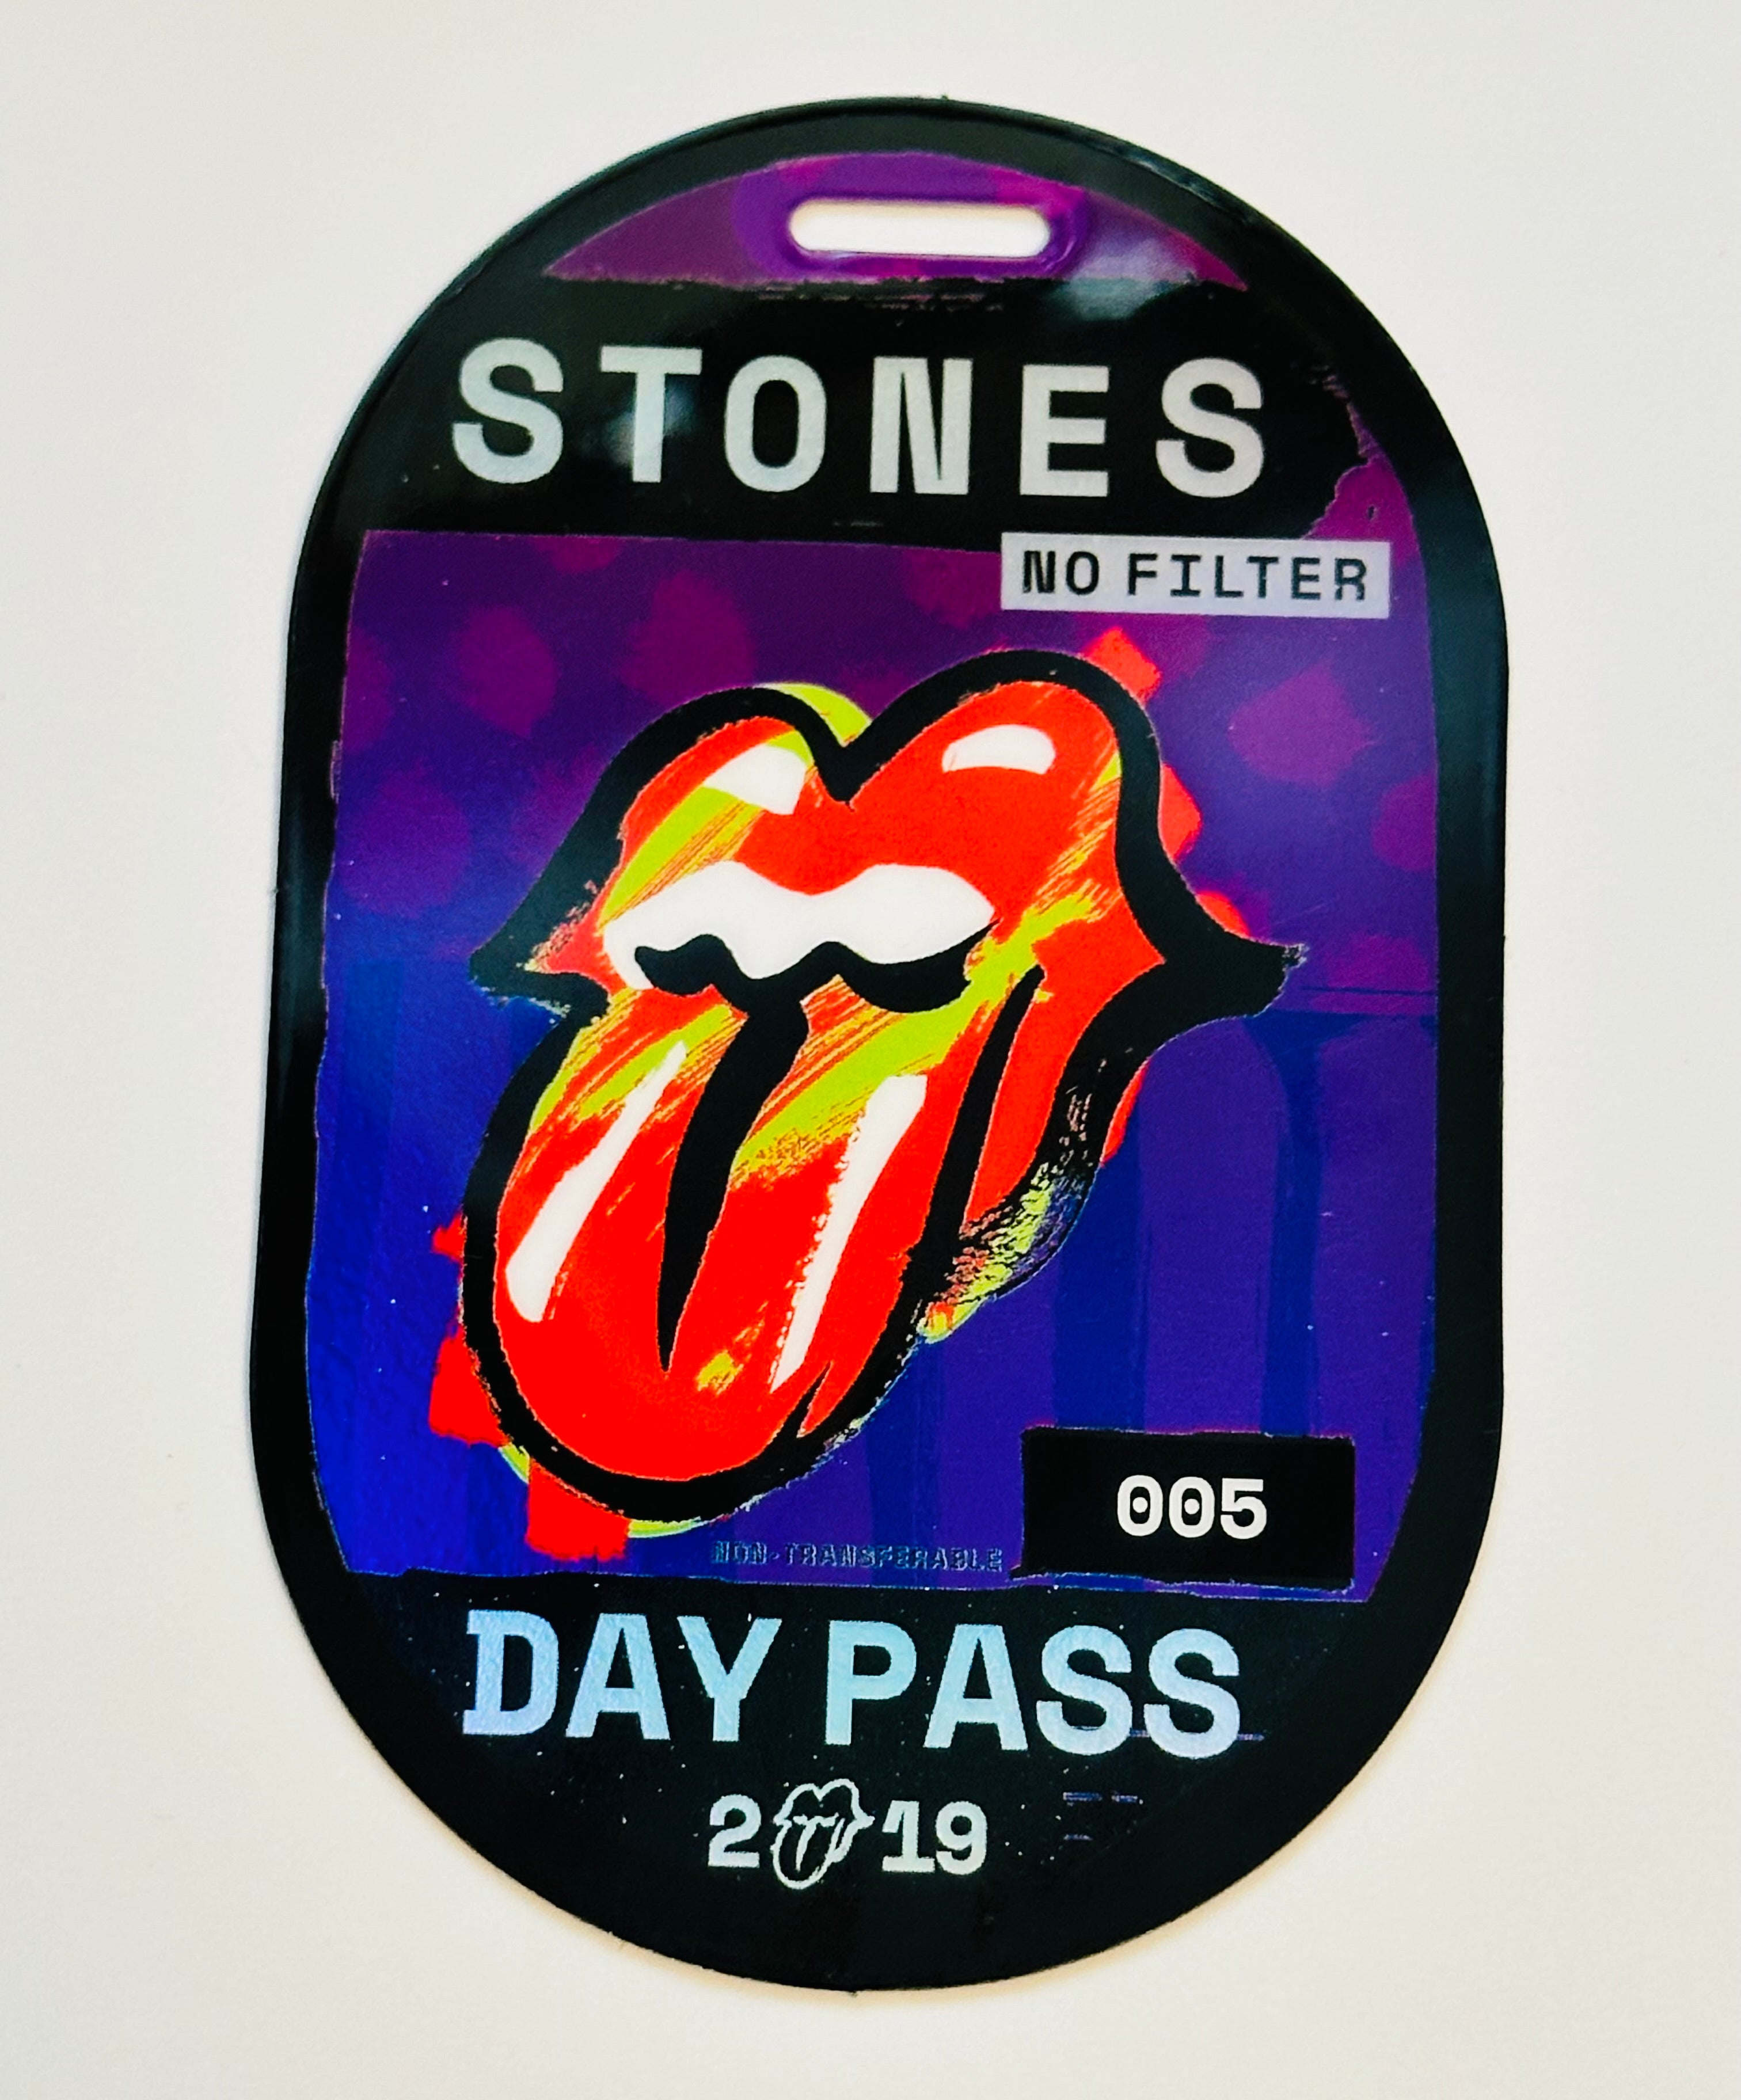 Rolling Stones rare backstage concert pass laminated 2019